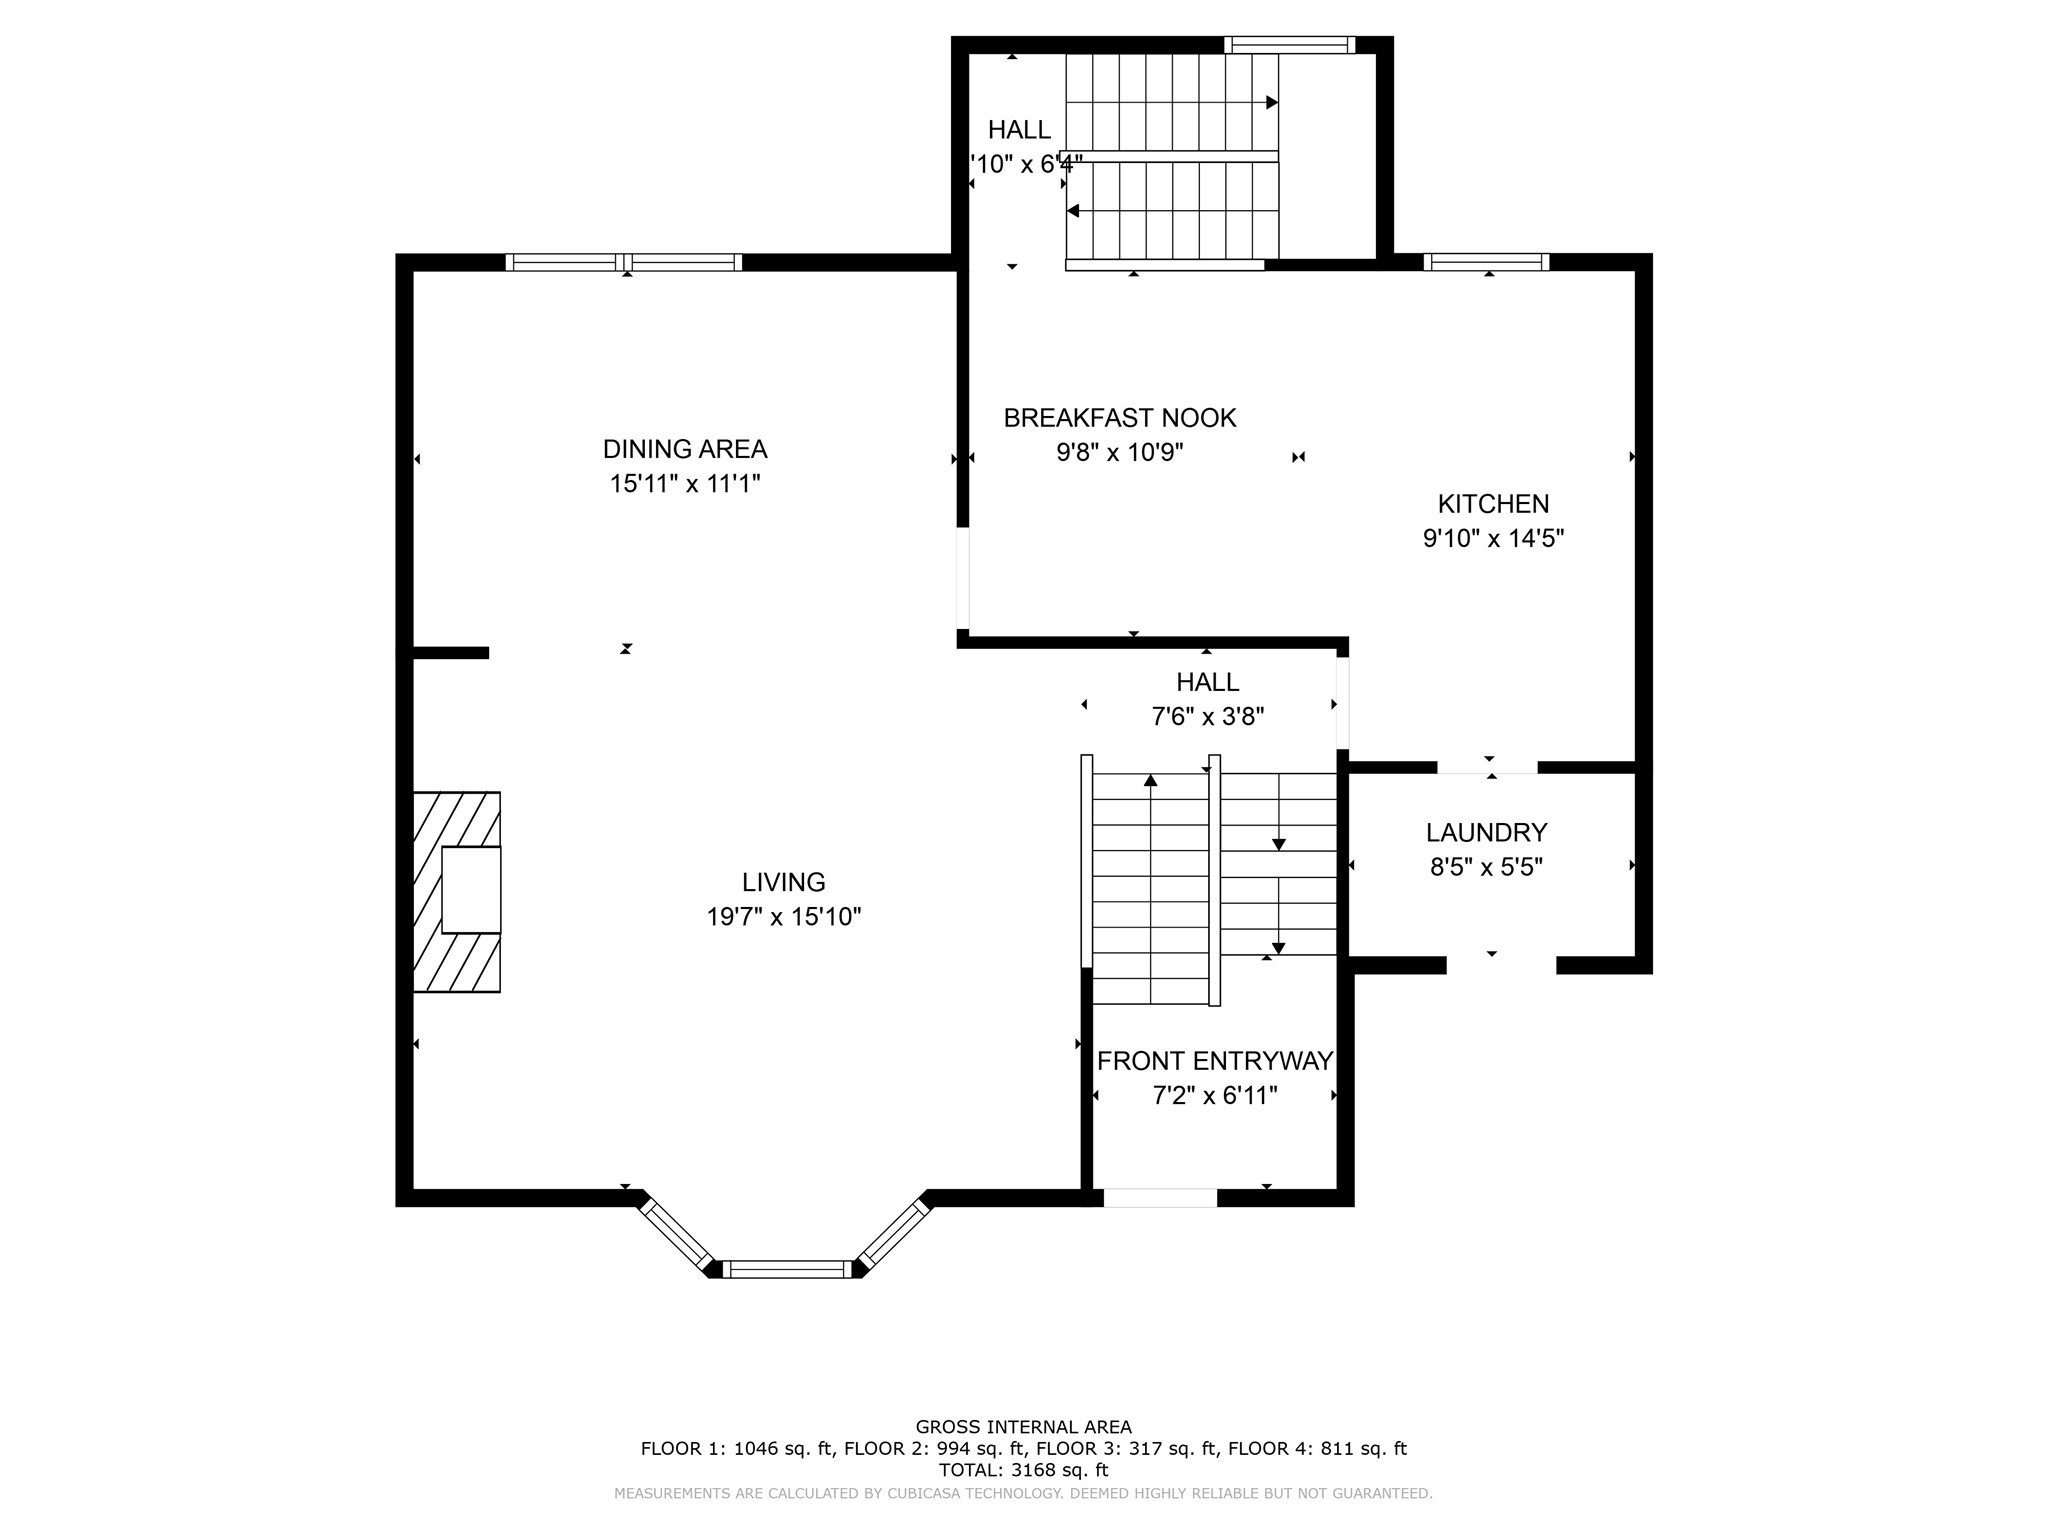 Main floor with living room, dining room, kitchen and laundry/pantry